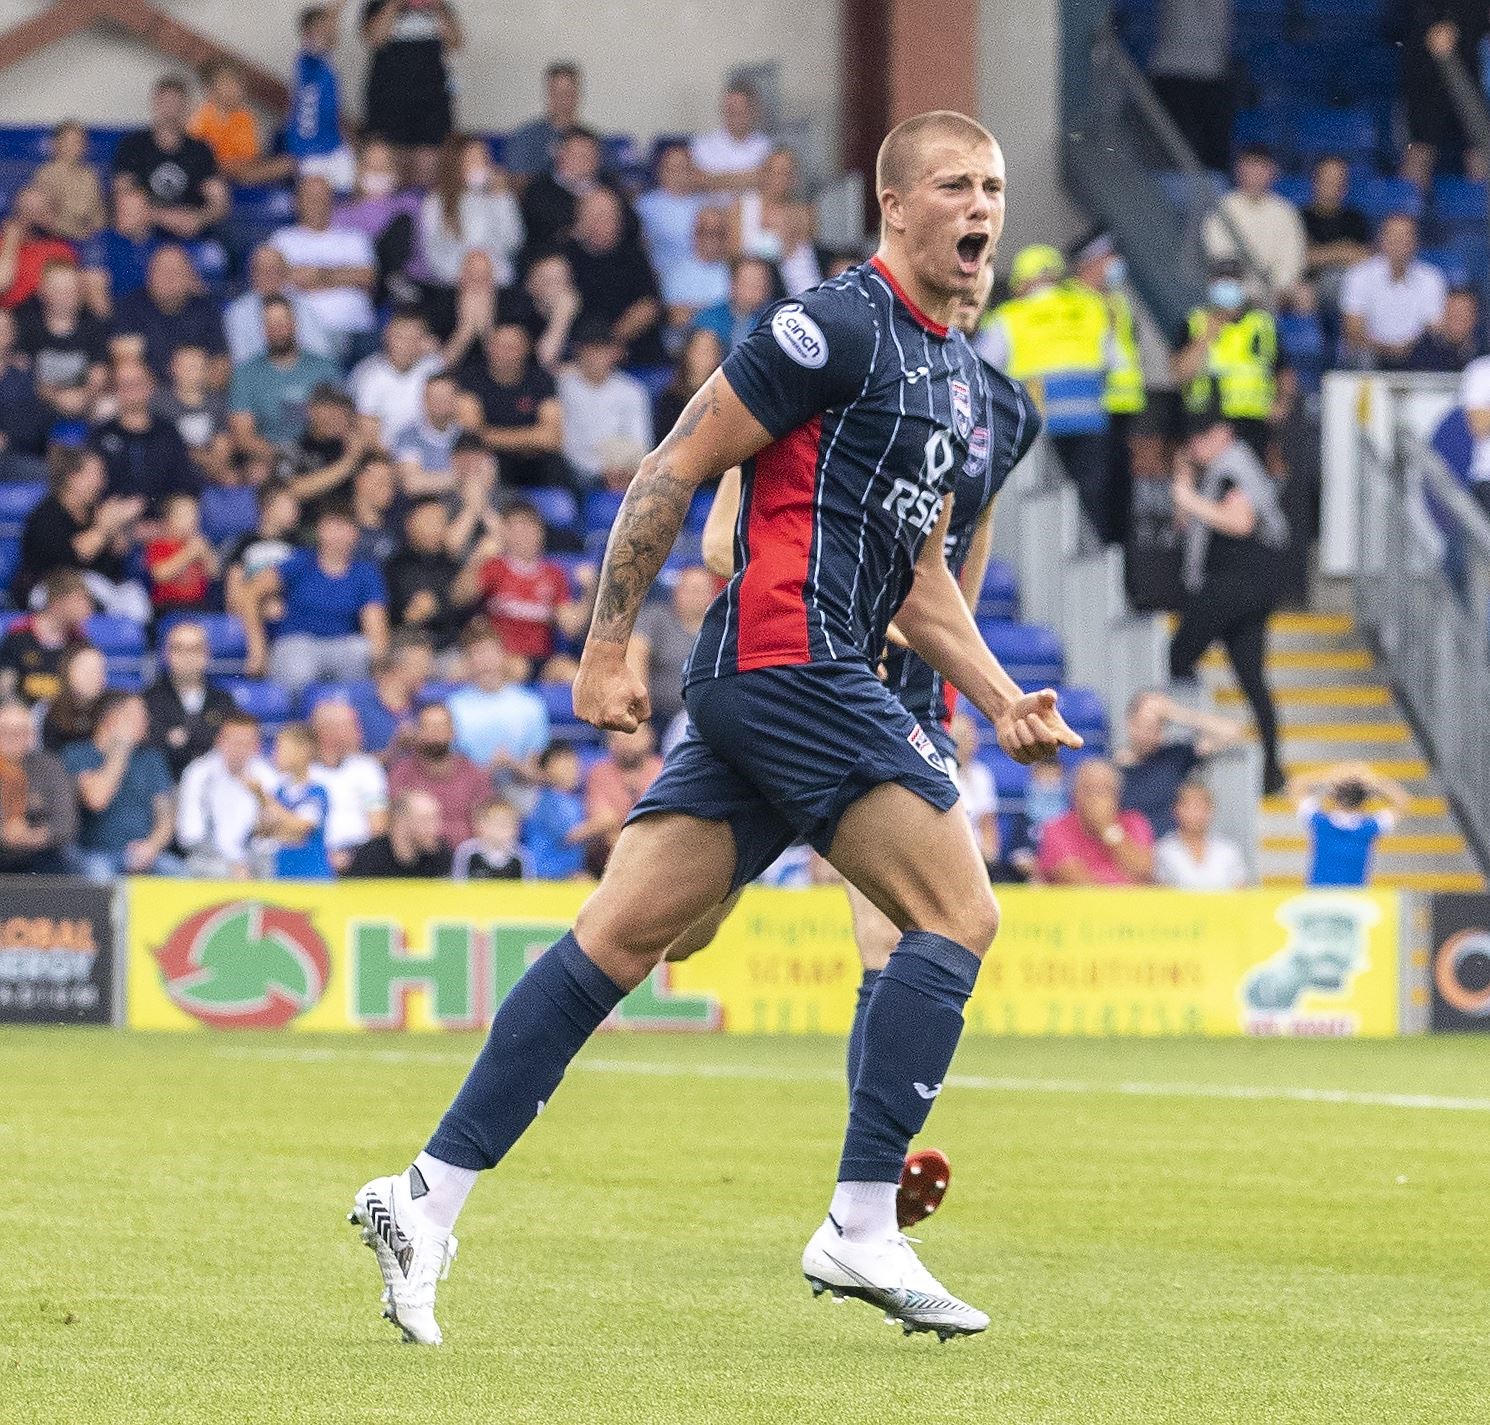 Picture - Ken Macpherson, Inverness. Ross County(2) v Rangers(4). 22.08.21. Ross County's Harry Clarke celebrates his goaL